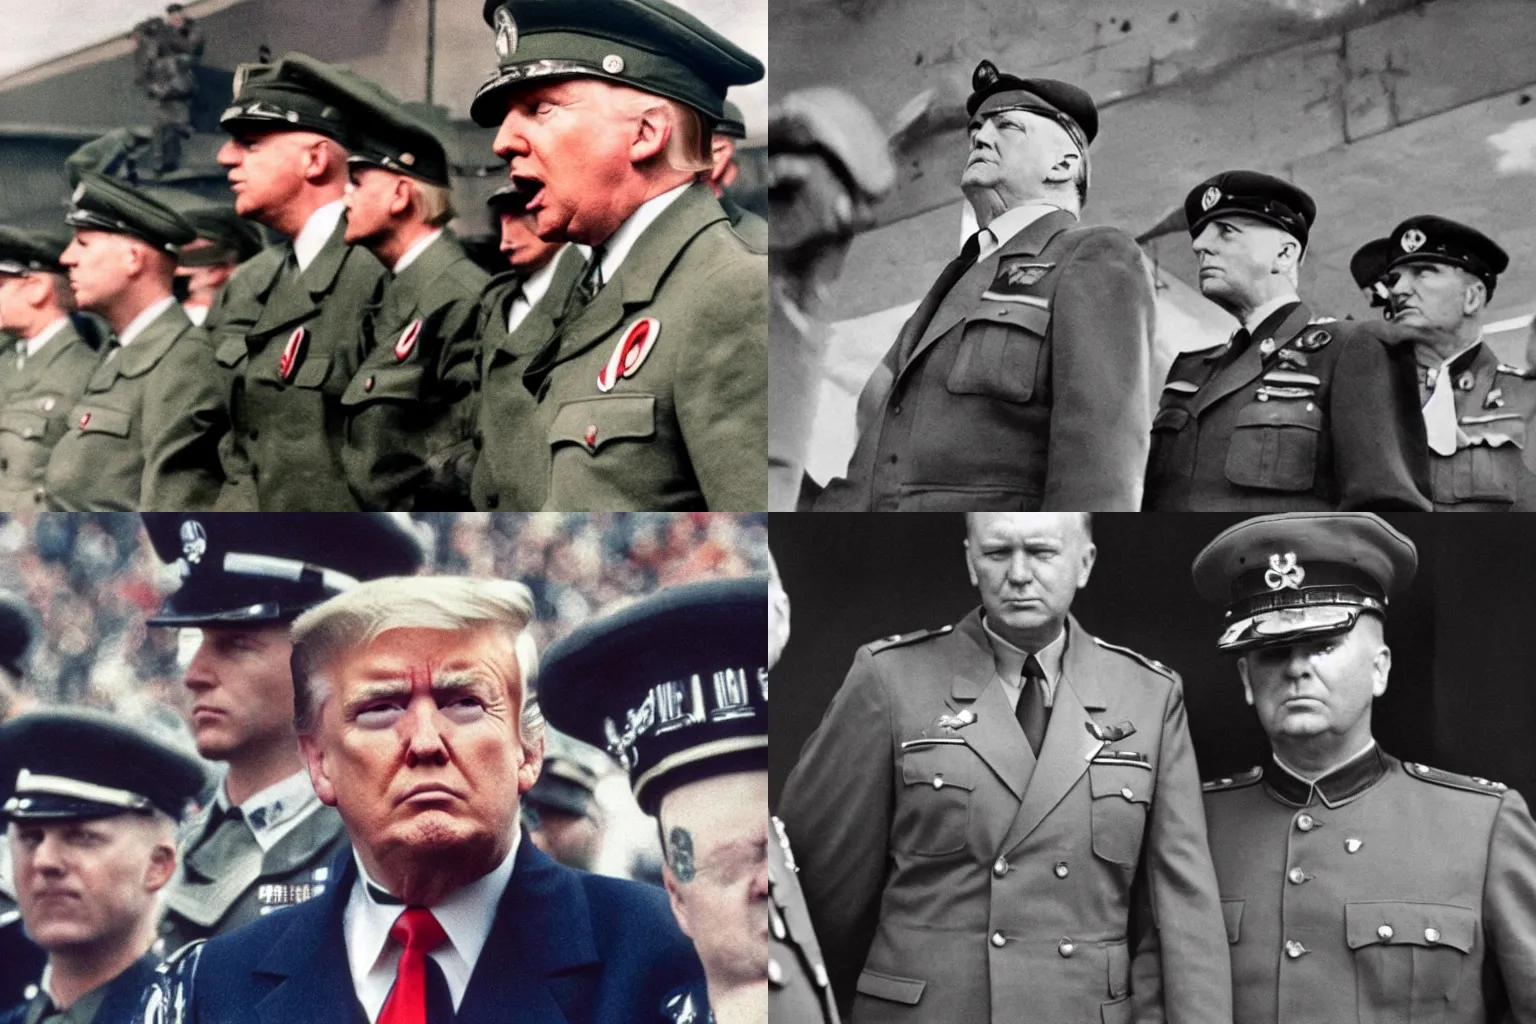 Prompt: color portrait photograph close up of Donald Trump wearing Reichsstaffelführer outfit yelling angrily, standing alongside Schutzstaffel holding mp40, inside a busy stadium designed by Marcello Piacentini, off-camera flash, canon 24mm f11 aperture, Ektachrome color photograph